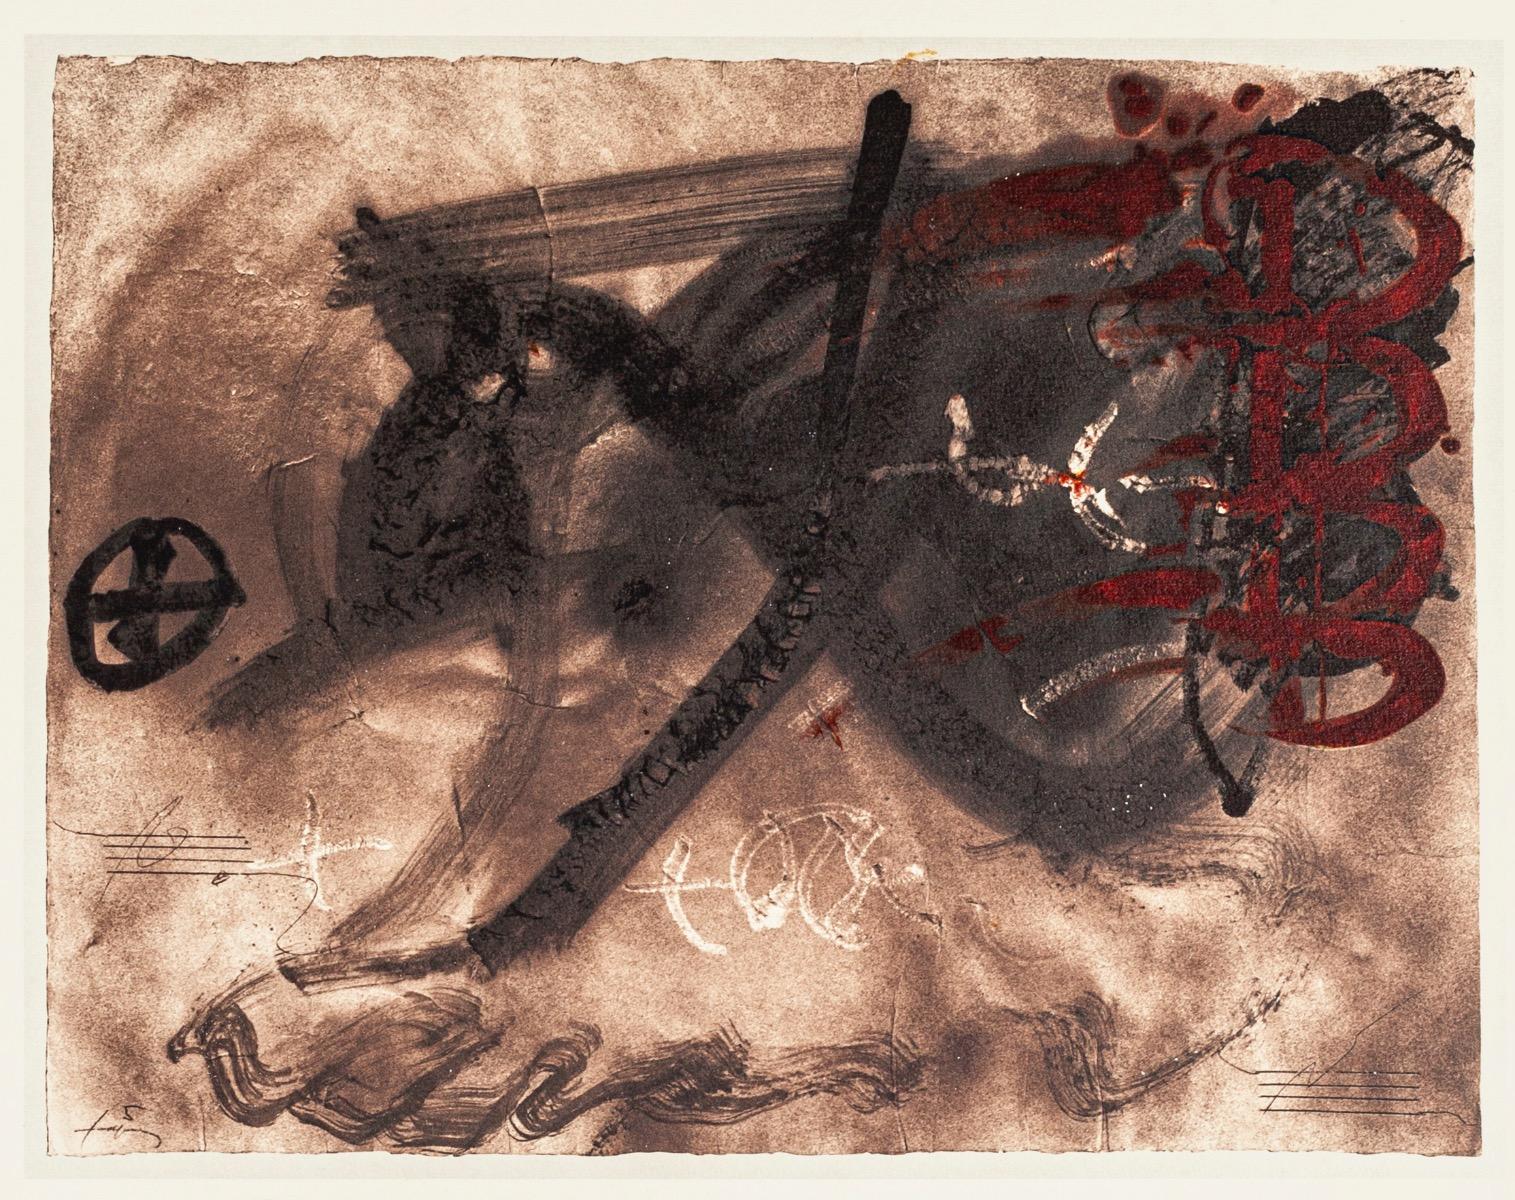 Antoni Tàpies (after) Abstract Print - Four Reddish Arches - Vintage Offset Print After Antoni Tàpies - 1982